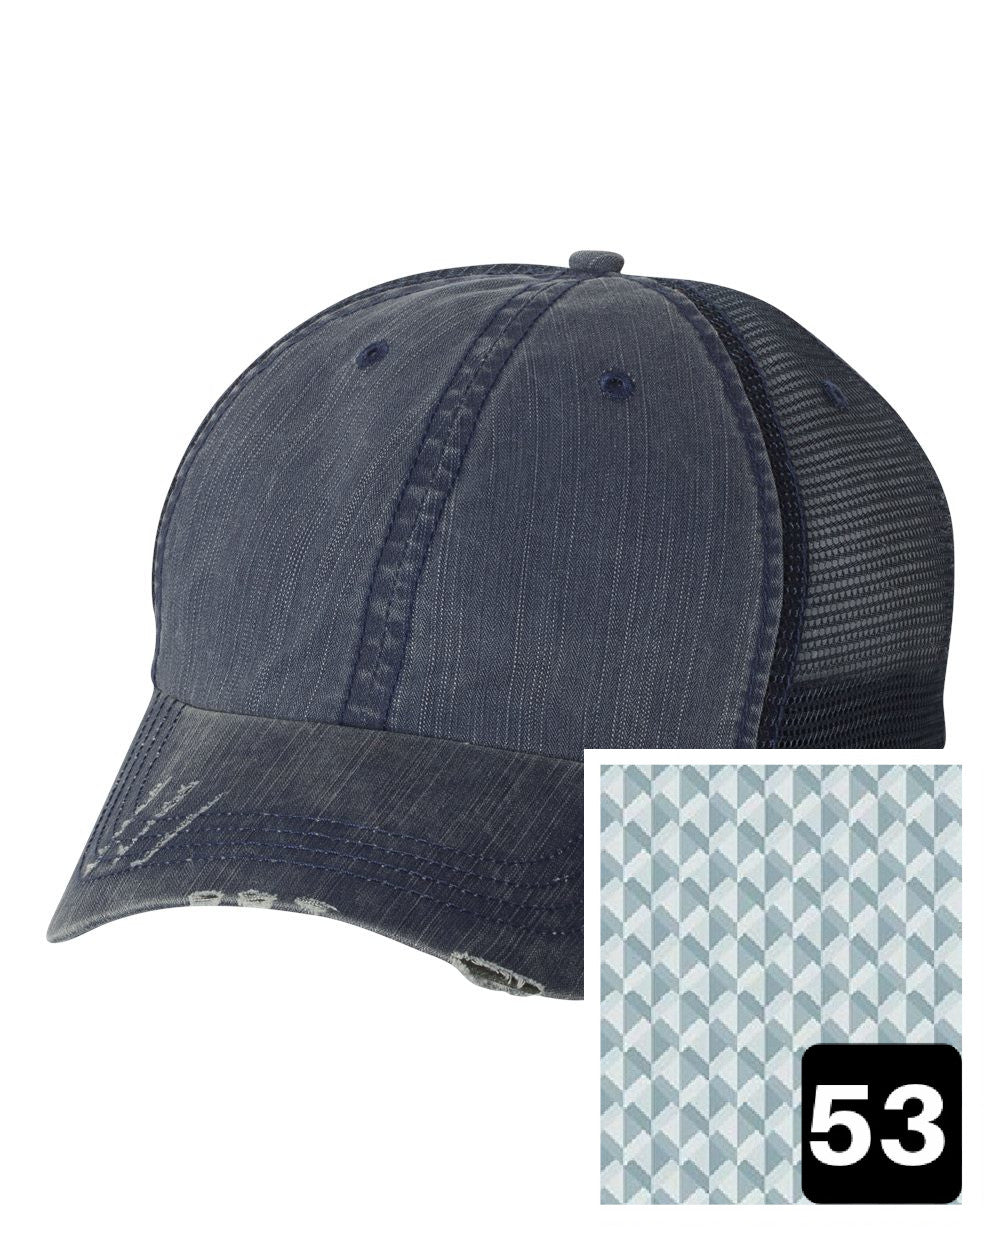 Illinois Hat | Navy Distressed Trucker Cap | Many Fabric Choices